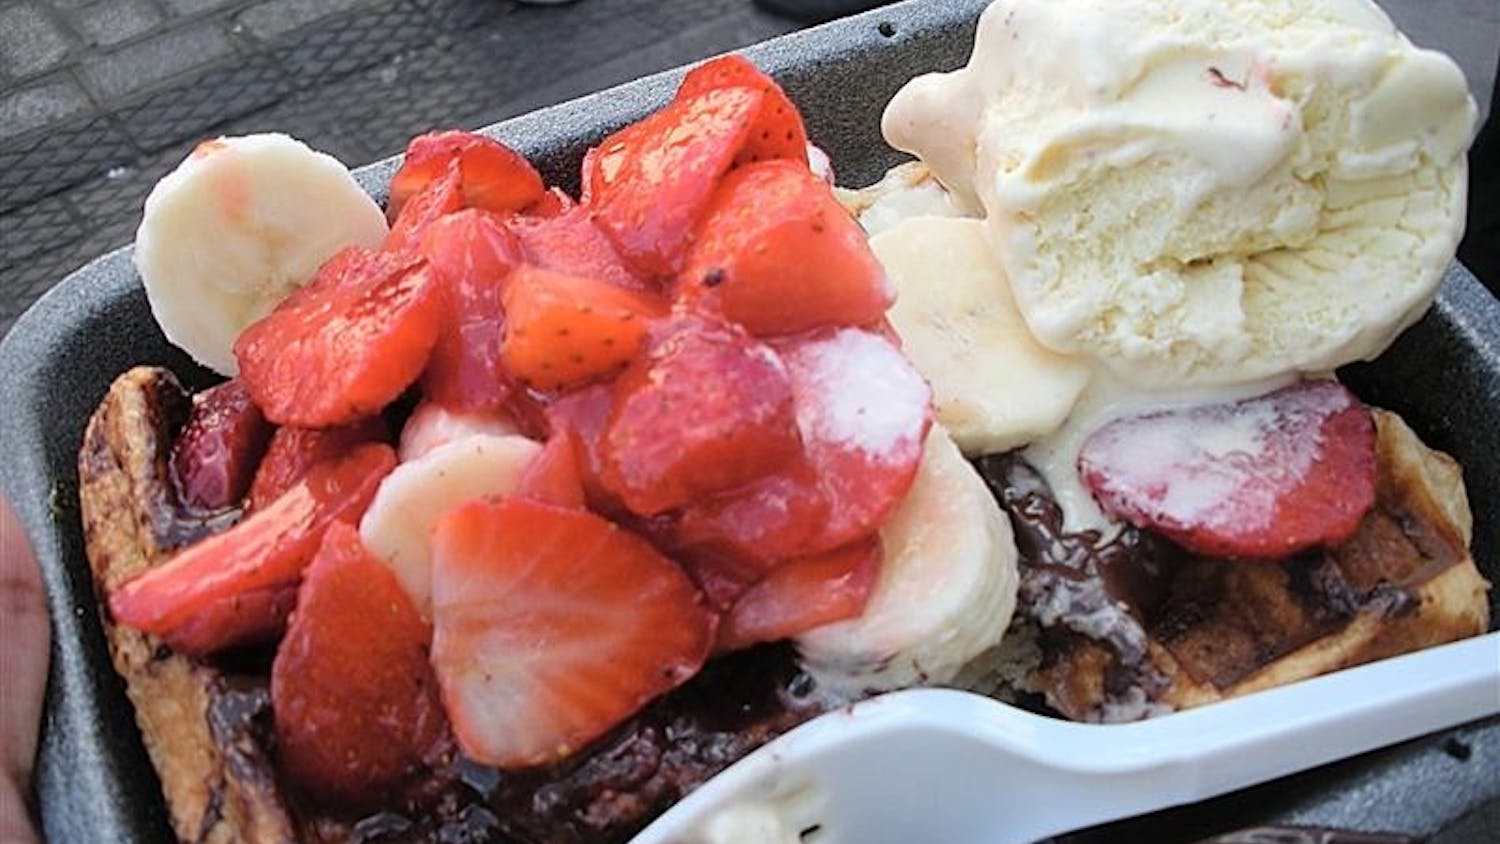 A Belgian waffle drizzled with chocolate syrup and topped with strawberries and ice cream from the Camden Lock Market in London.  